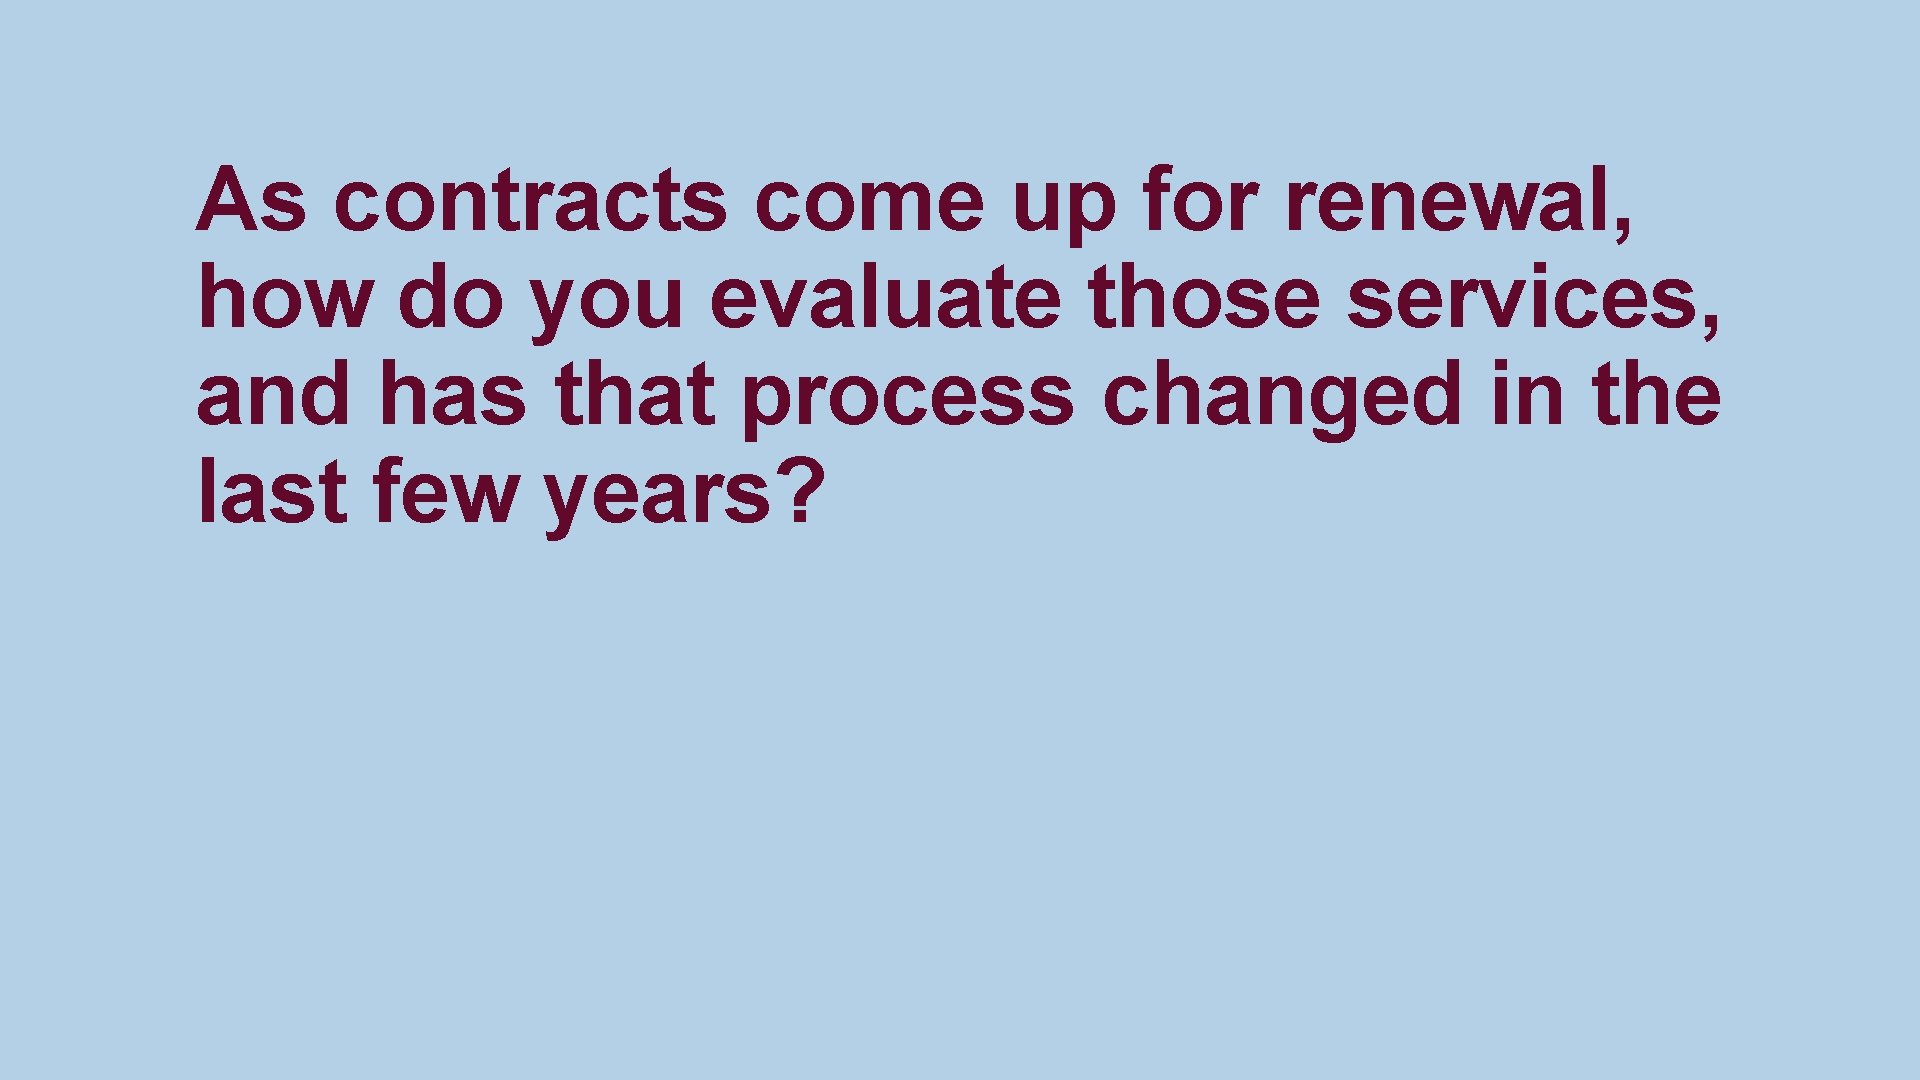 As contracts come up for renewal, how do you evaluate those services, and has